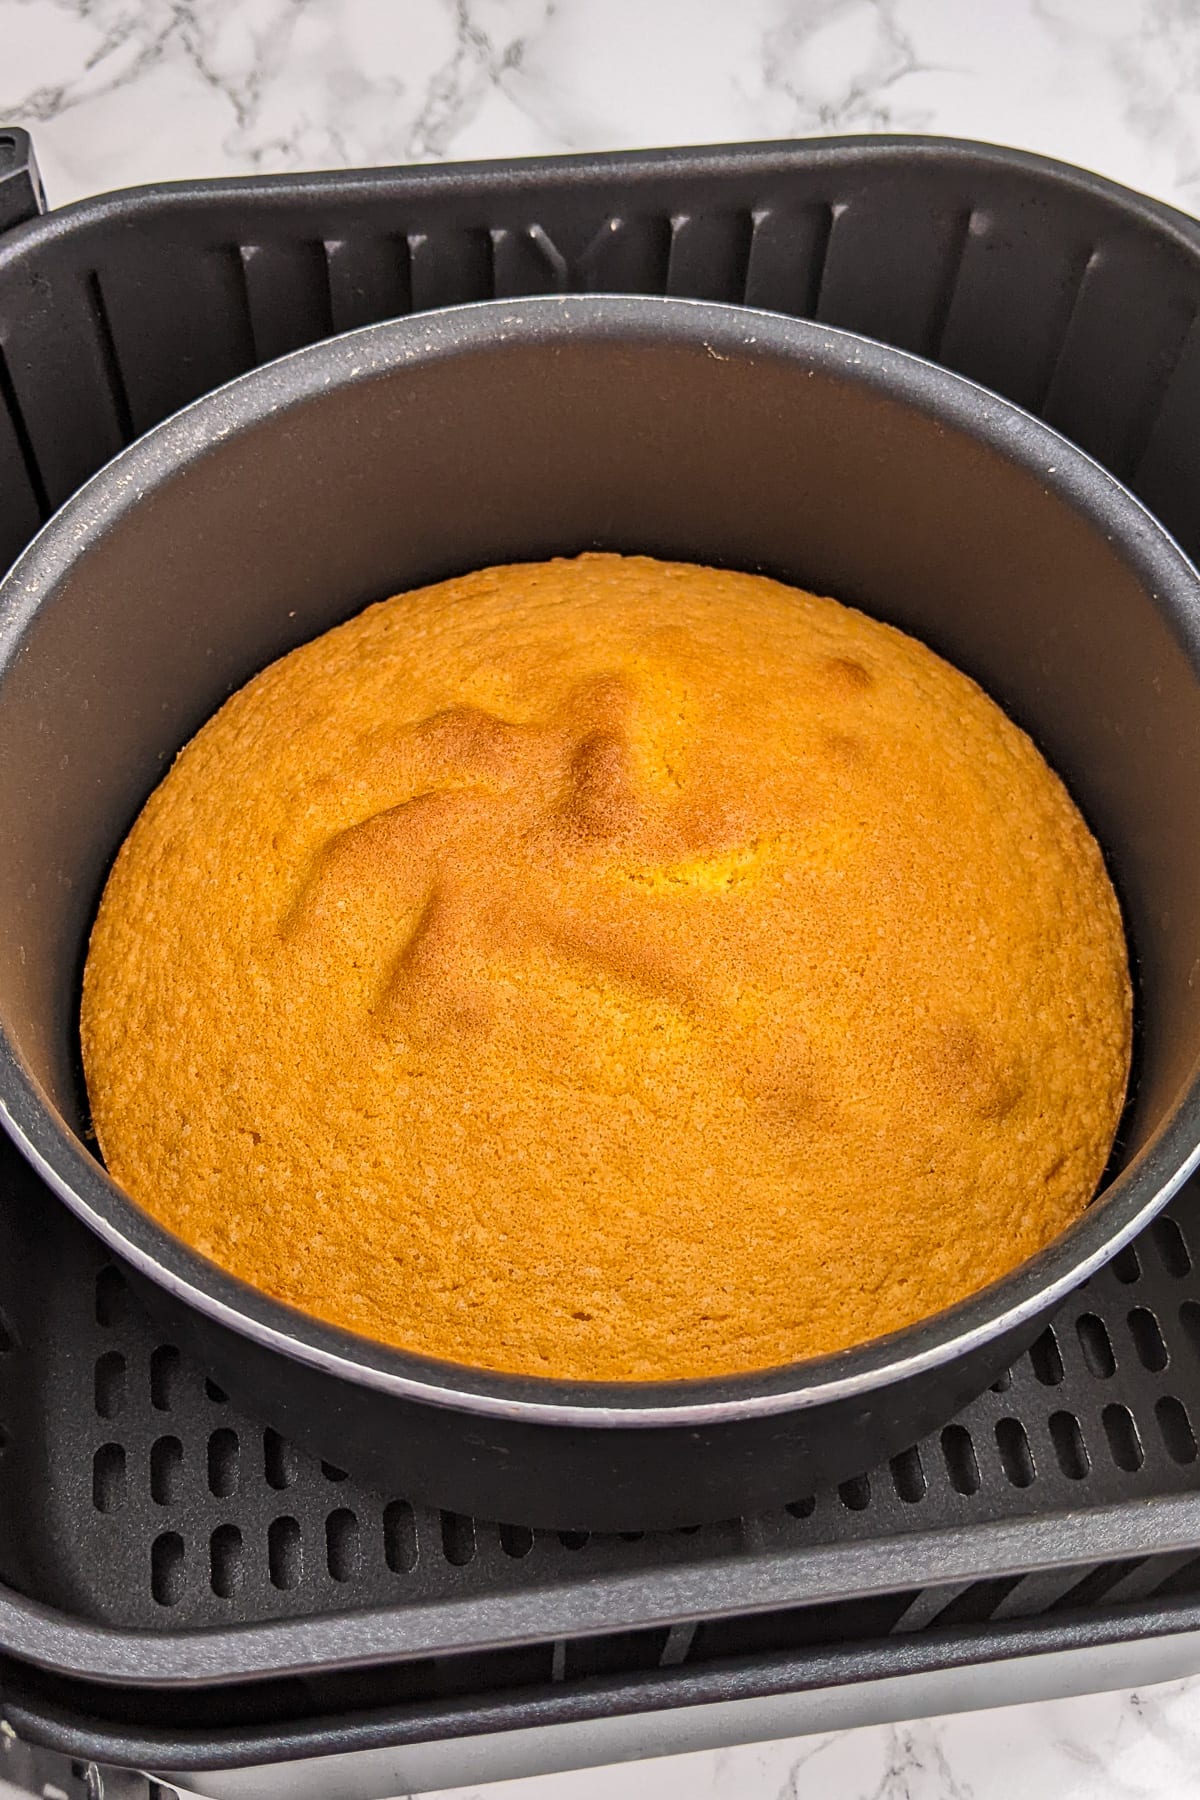 Top view of sponge cake in an air fryer basket on a marble table.